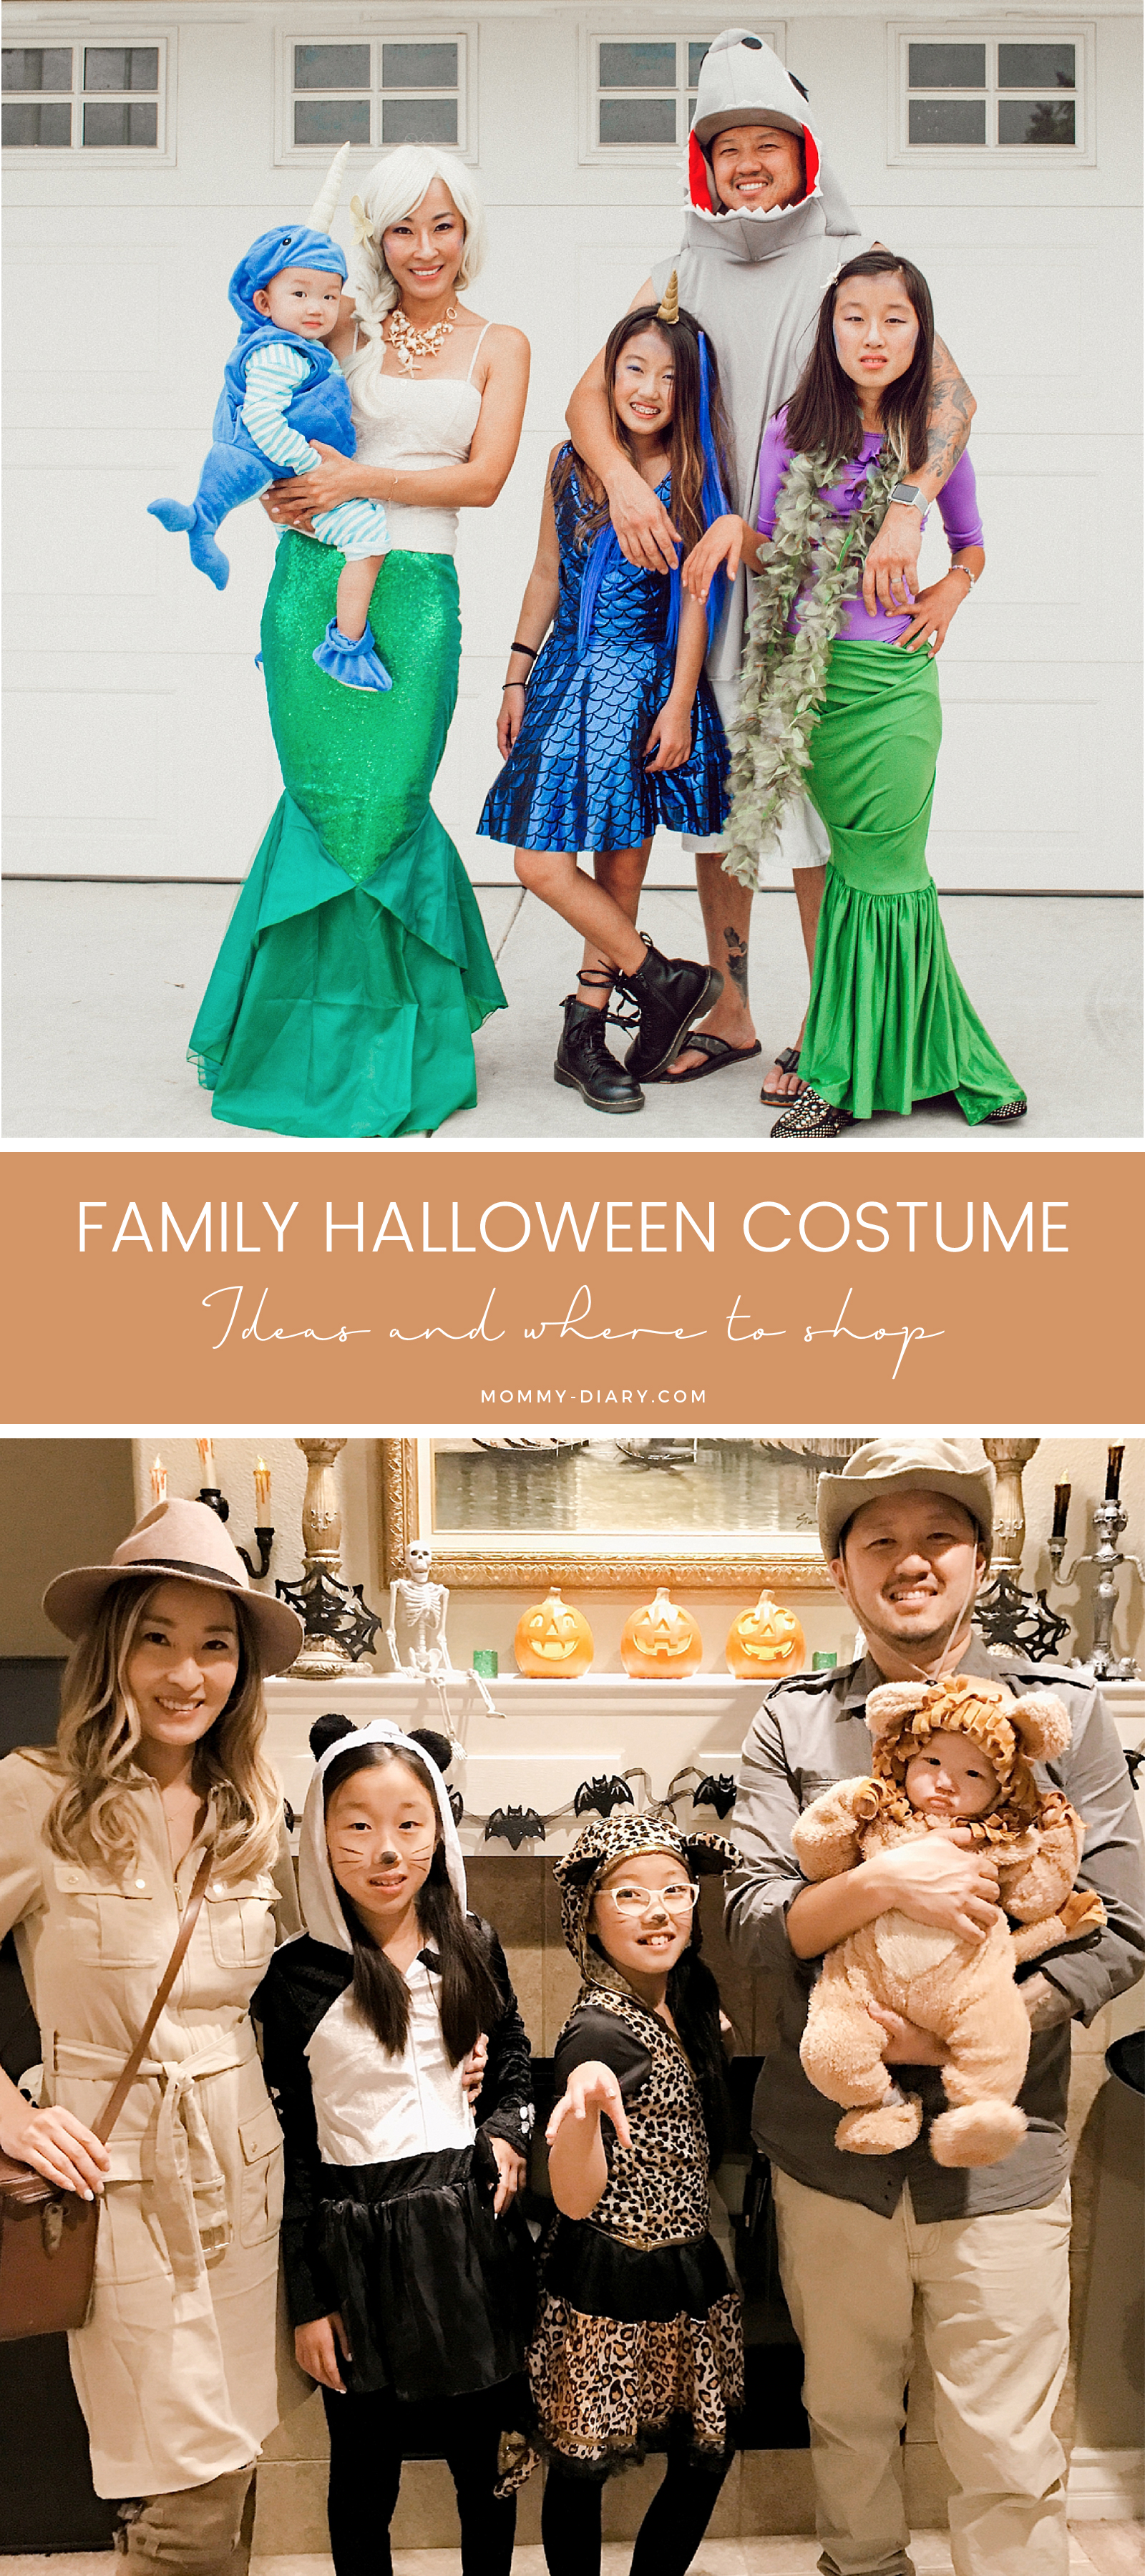 Unique Family Halloween Costume Ideas | Mommy Diary ®